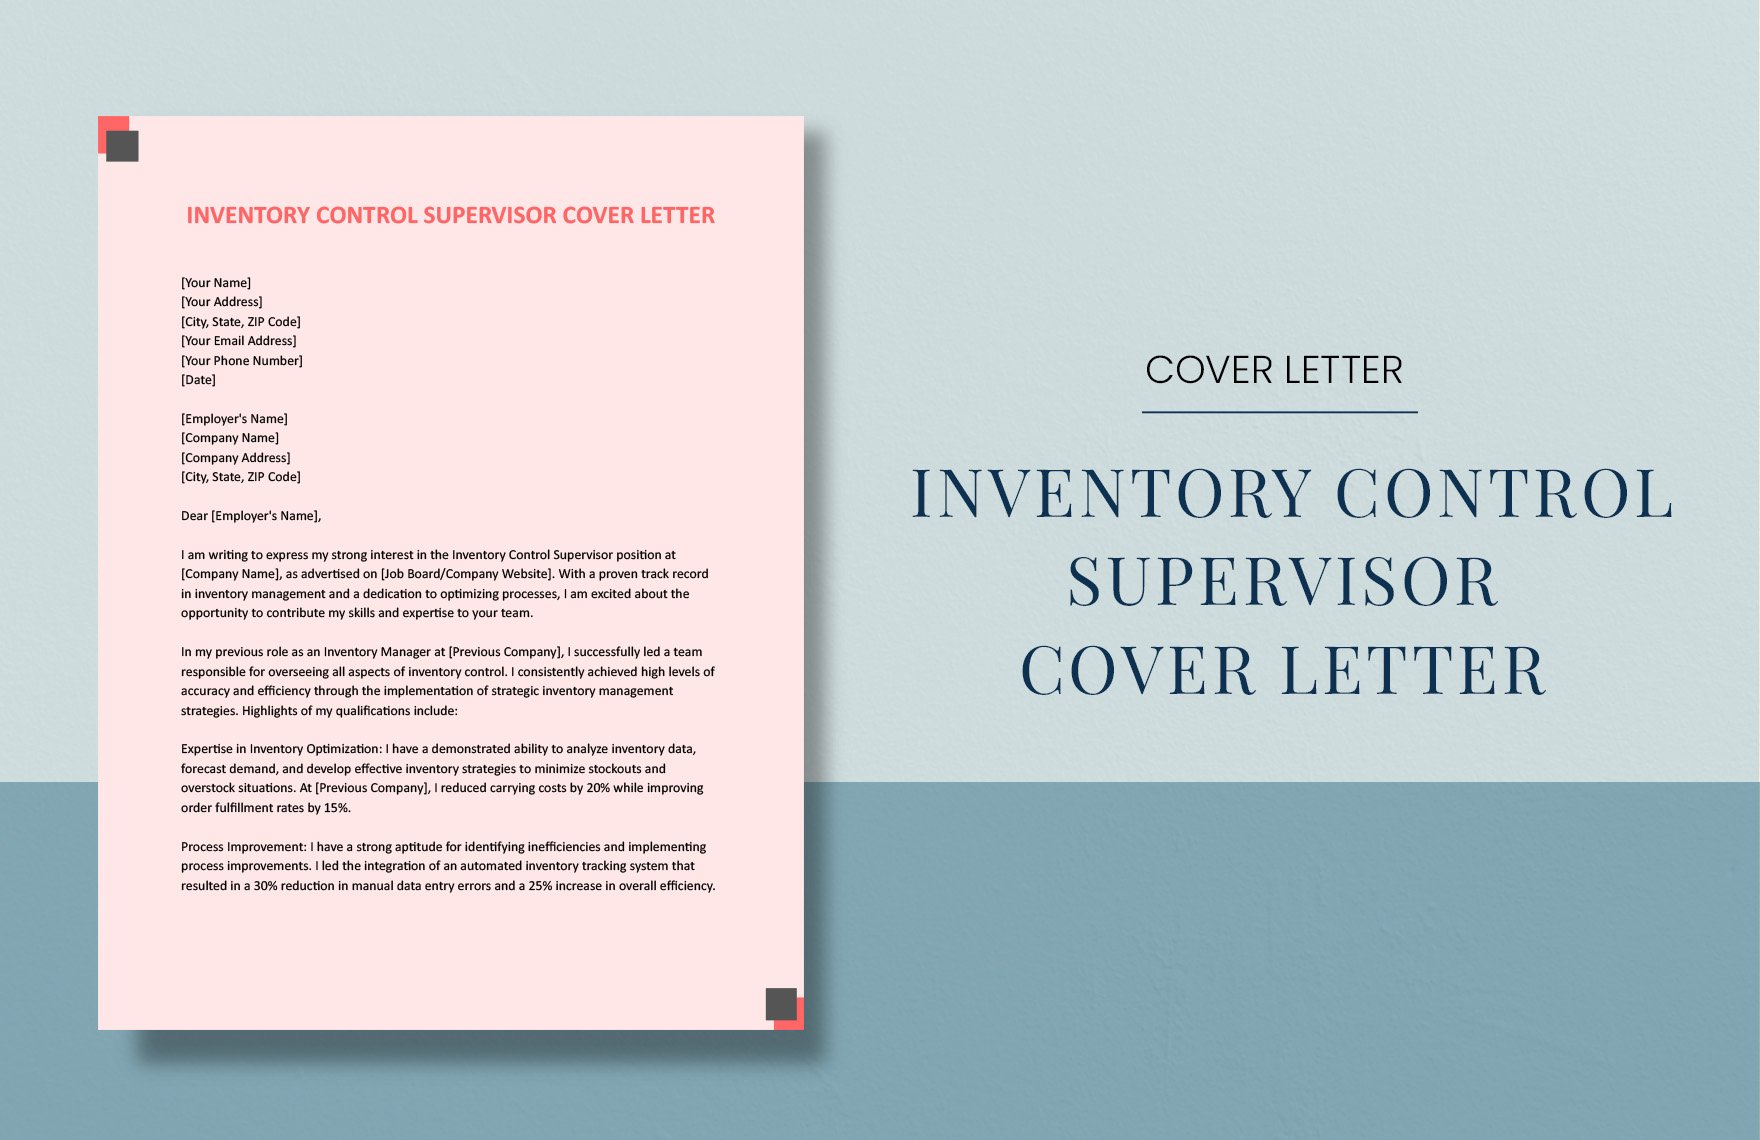 Inventory Control Supervisor Cover Letter in Word, Google Docs